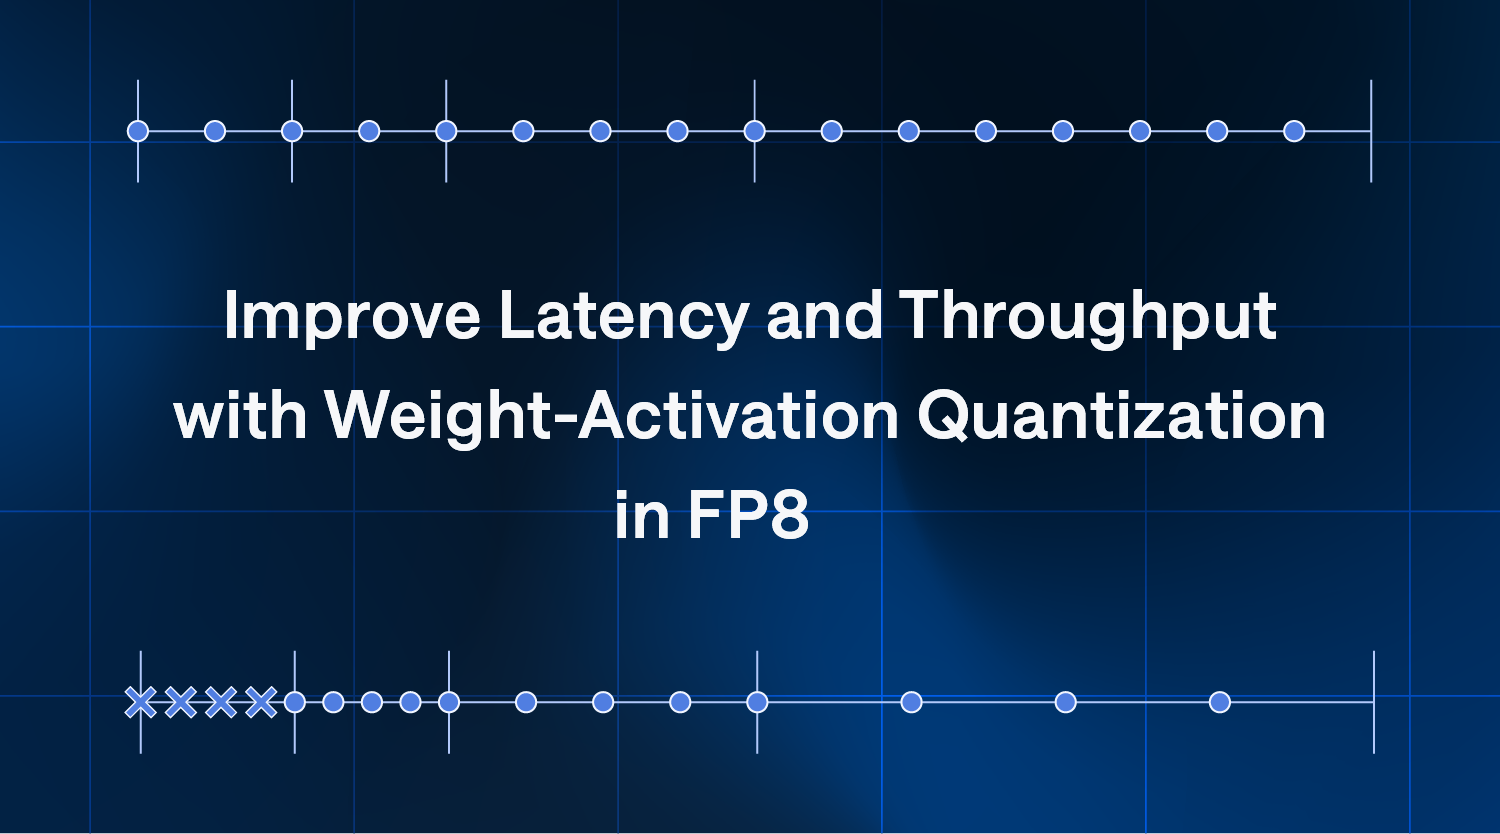 Improve Latency and Throughput with Weight-Activation Quantization in FP8 thumbnail